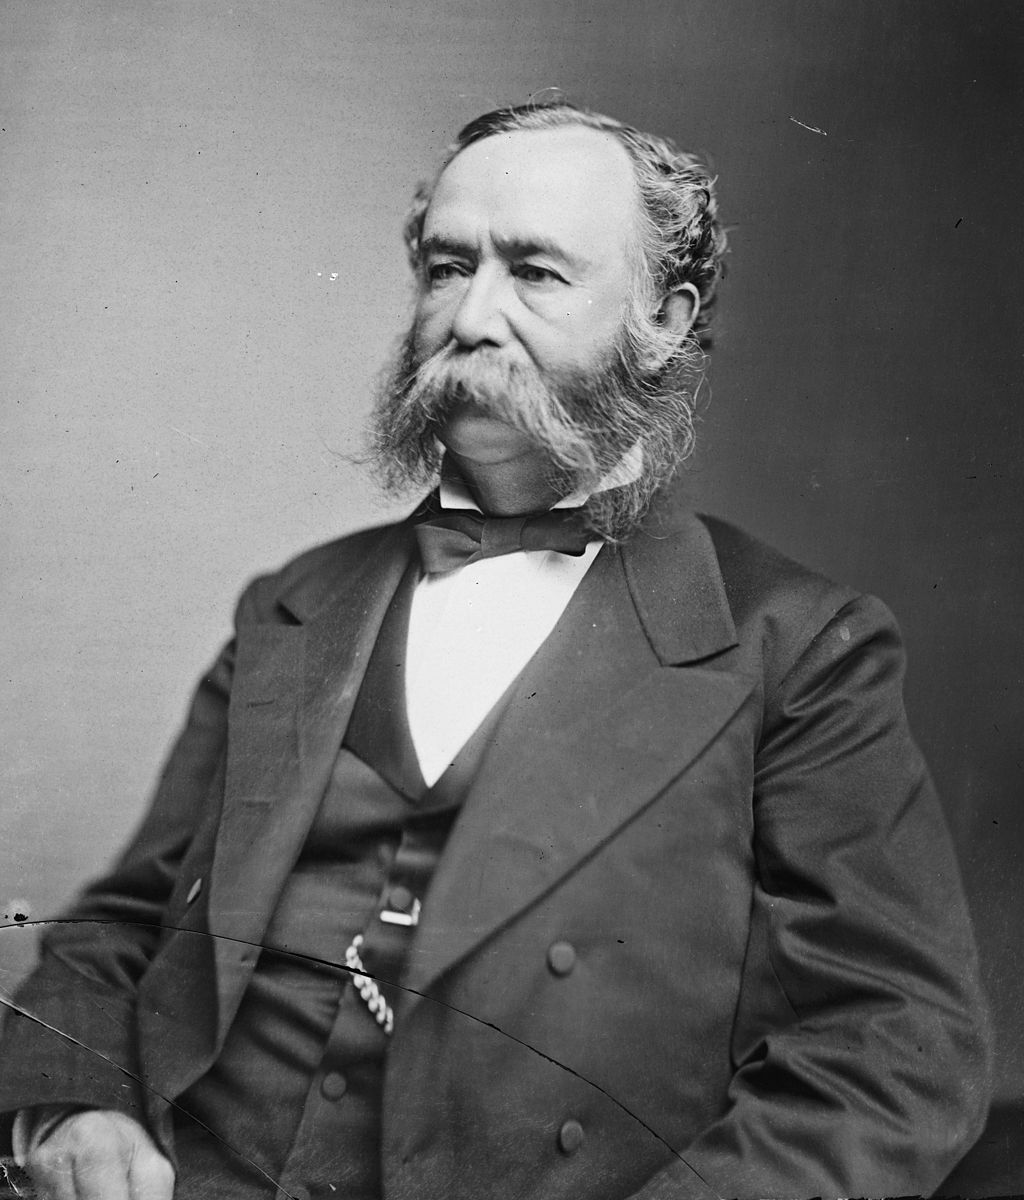 Wade Hampton was a Confederate general and senator from South Carolina. HIs son-in-law was a territorial judge in Western Alaska and named the census district for him. (Photo courtesy of the Library of Congress)